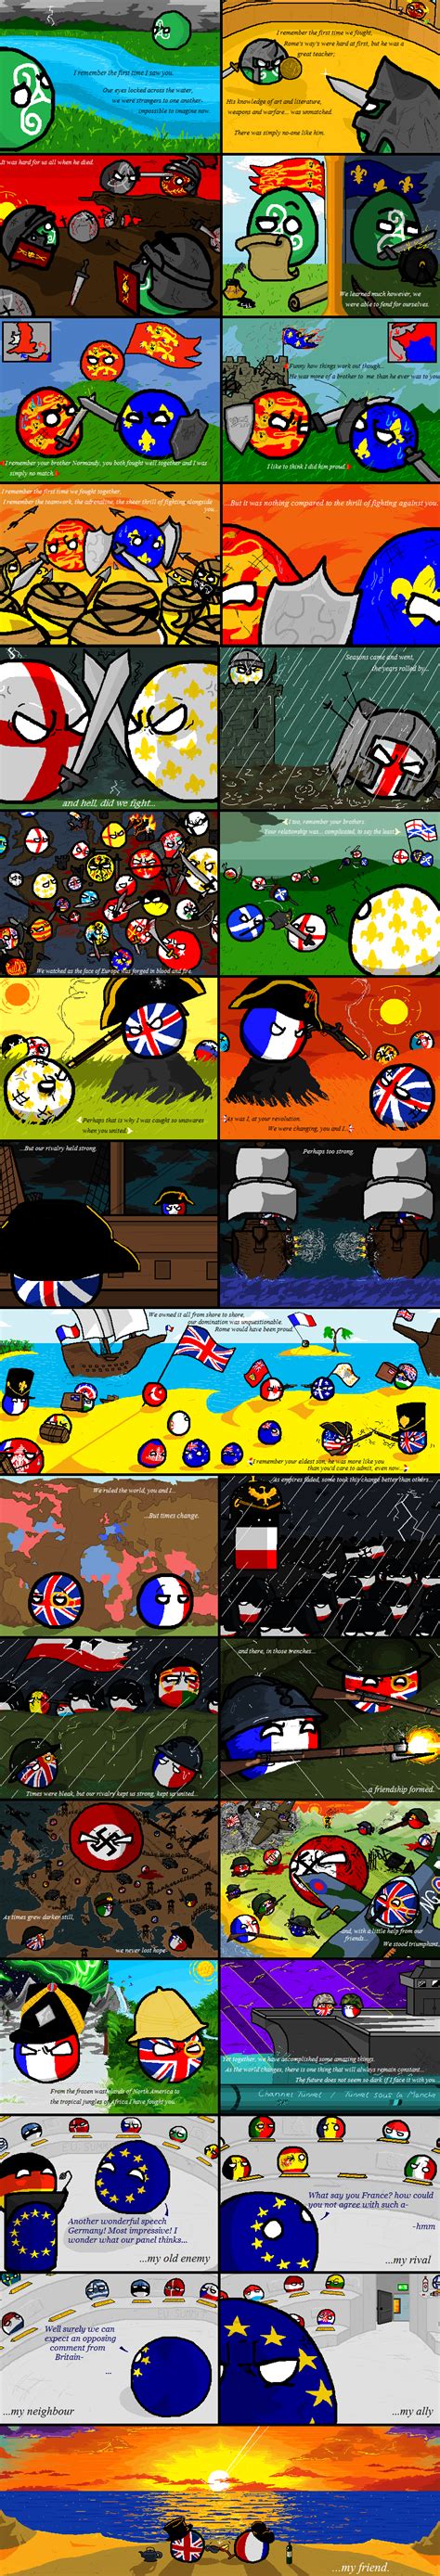 Born 431), is a country that surrenders a countryball located in europe and has a long history over in france. A Tale of Two Friends: France & The UK | Polandball | Know ...